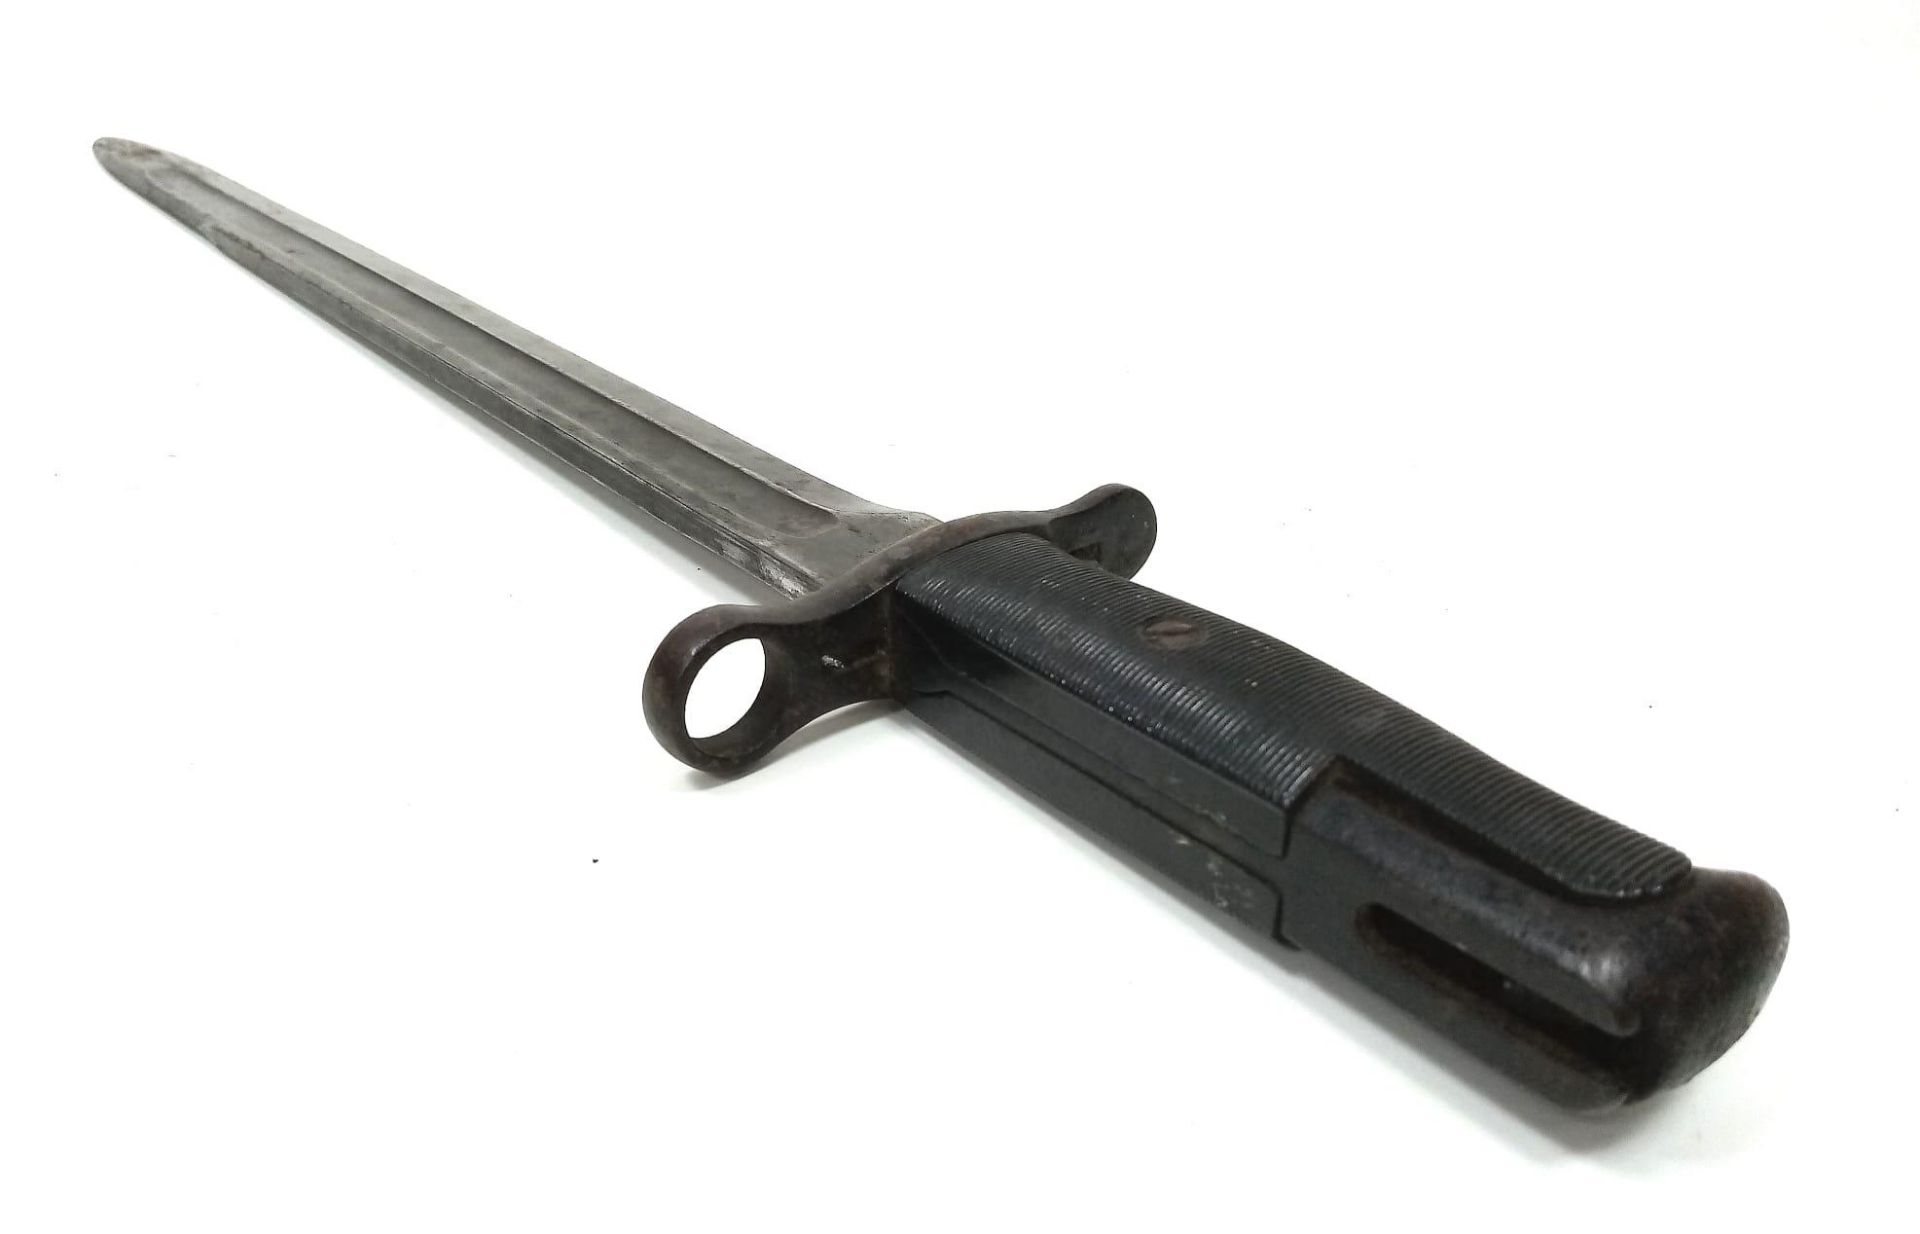 US Springfield Rock Island Arsenal M1905 16” Bayonet Dated 1906 re-issued in 1942 for the Garand - Image 8 of 15